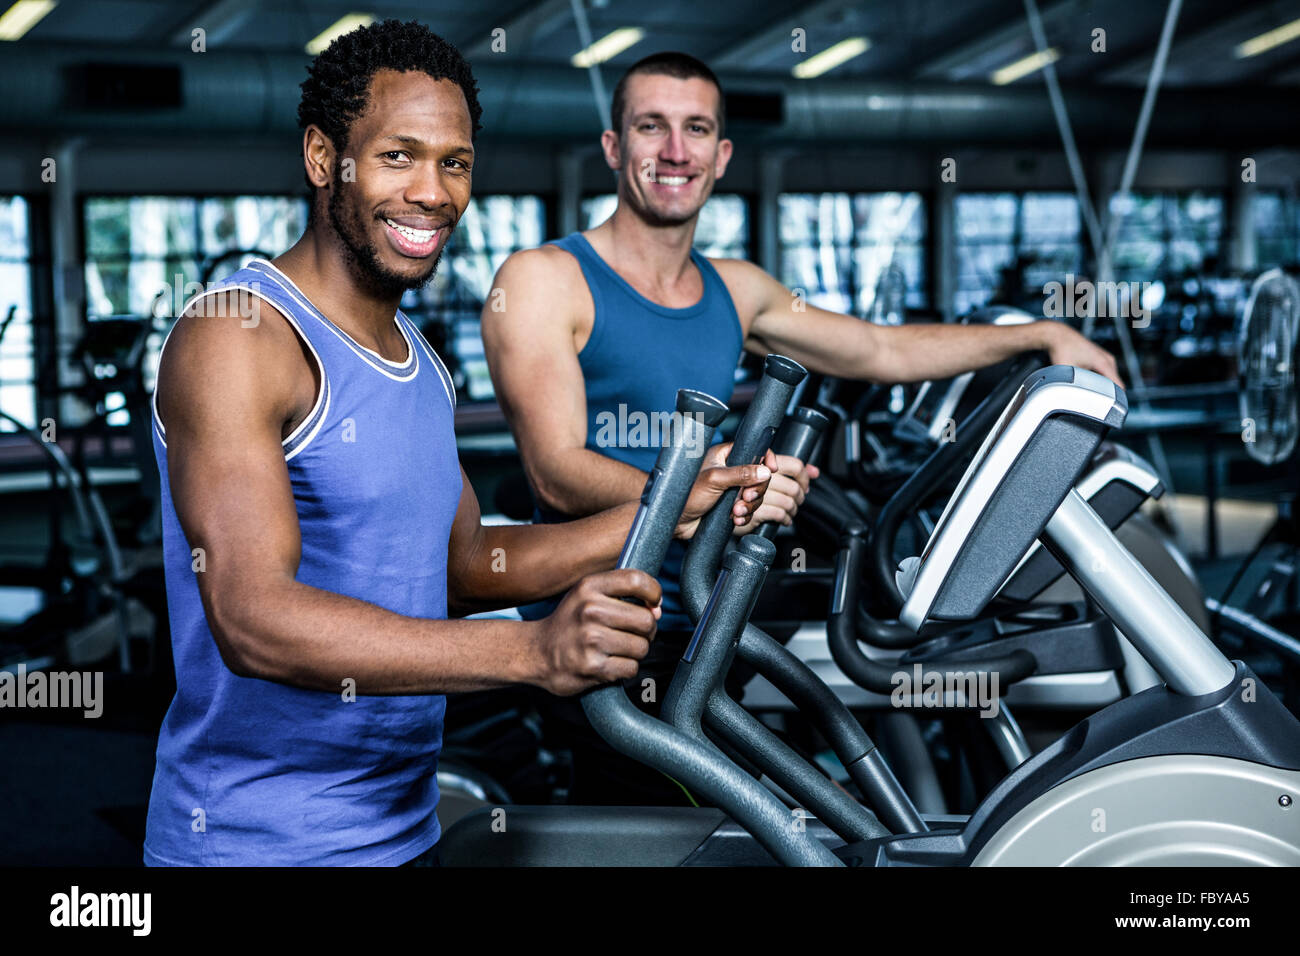 Two men working out together Stock Photo